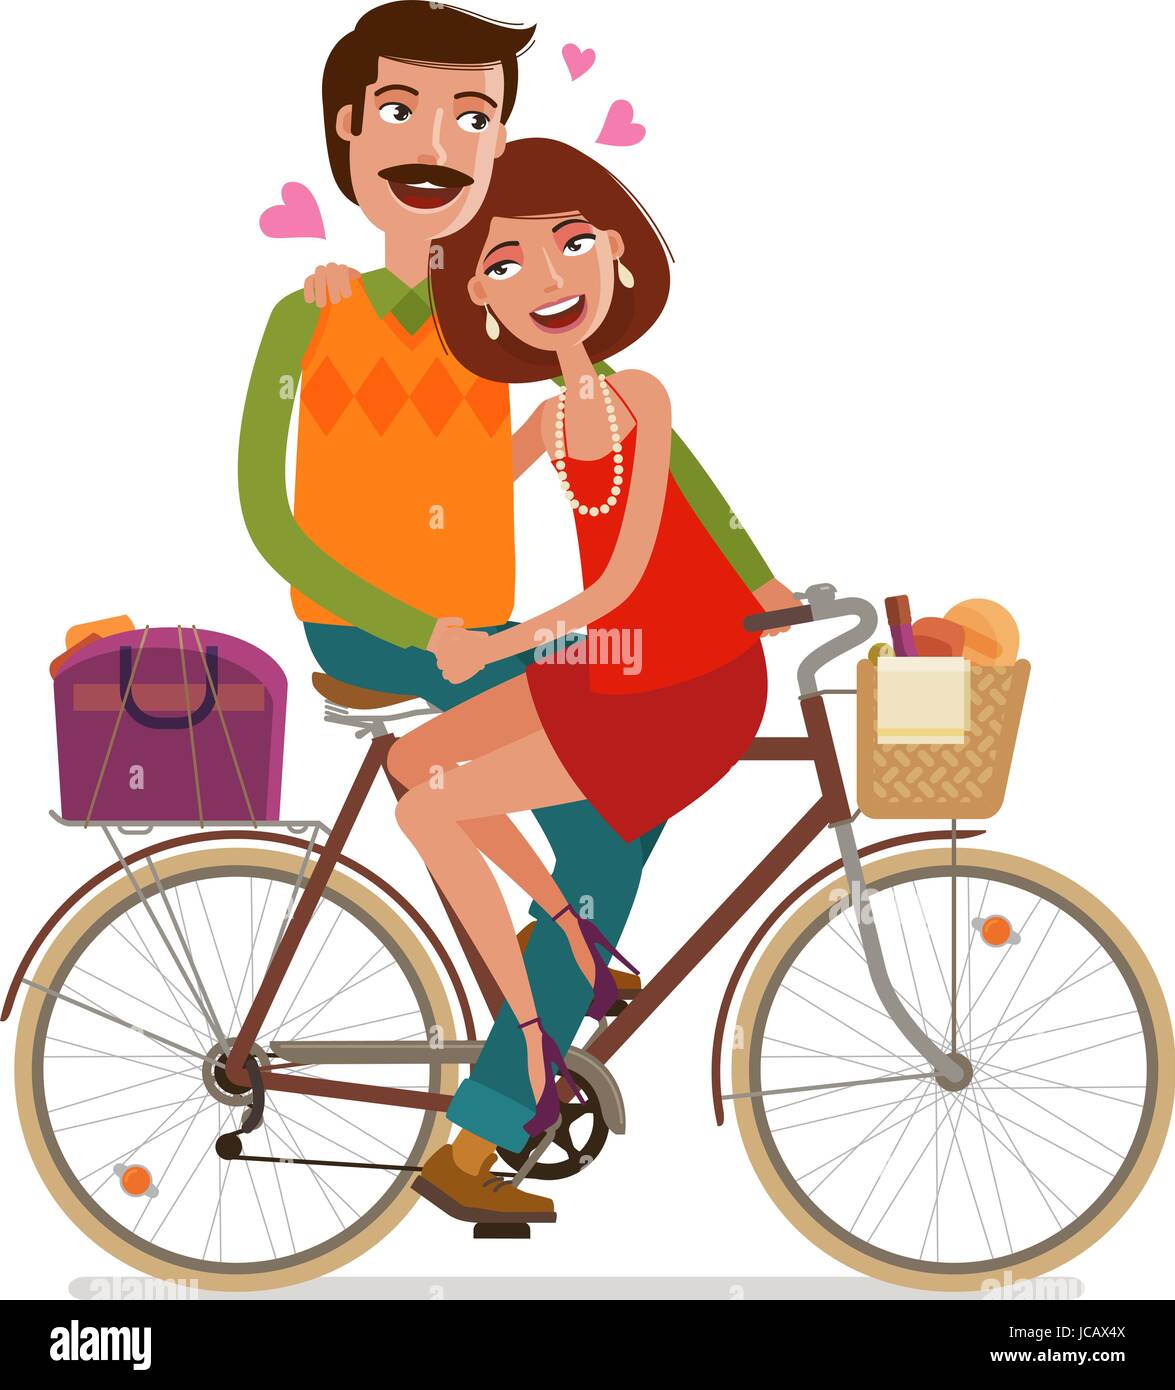 Bicycle Rider Free Vector Art 1 344 Free Downloads